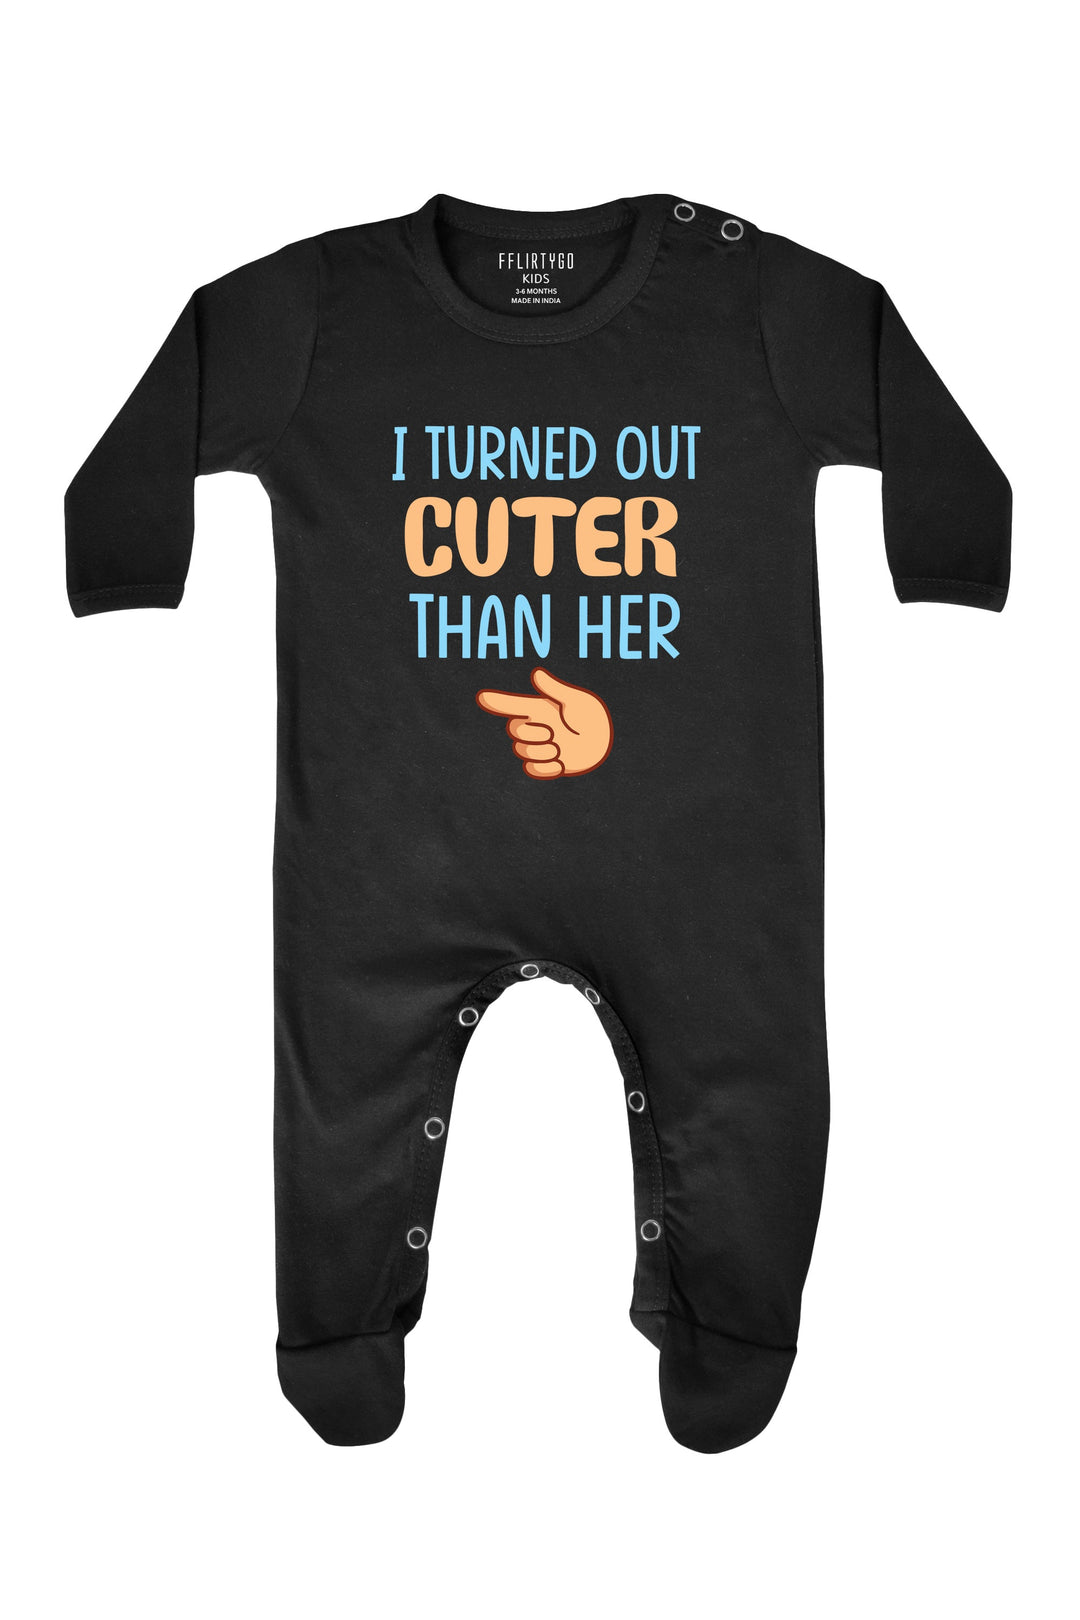 I Turned Out Cuter Than Her Baby Romper | Onesies